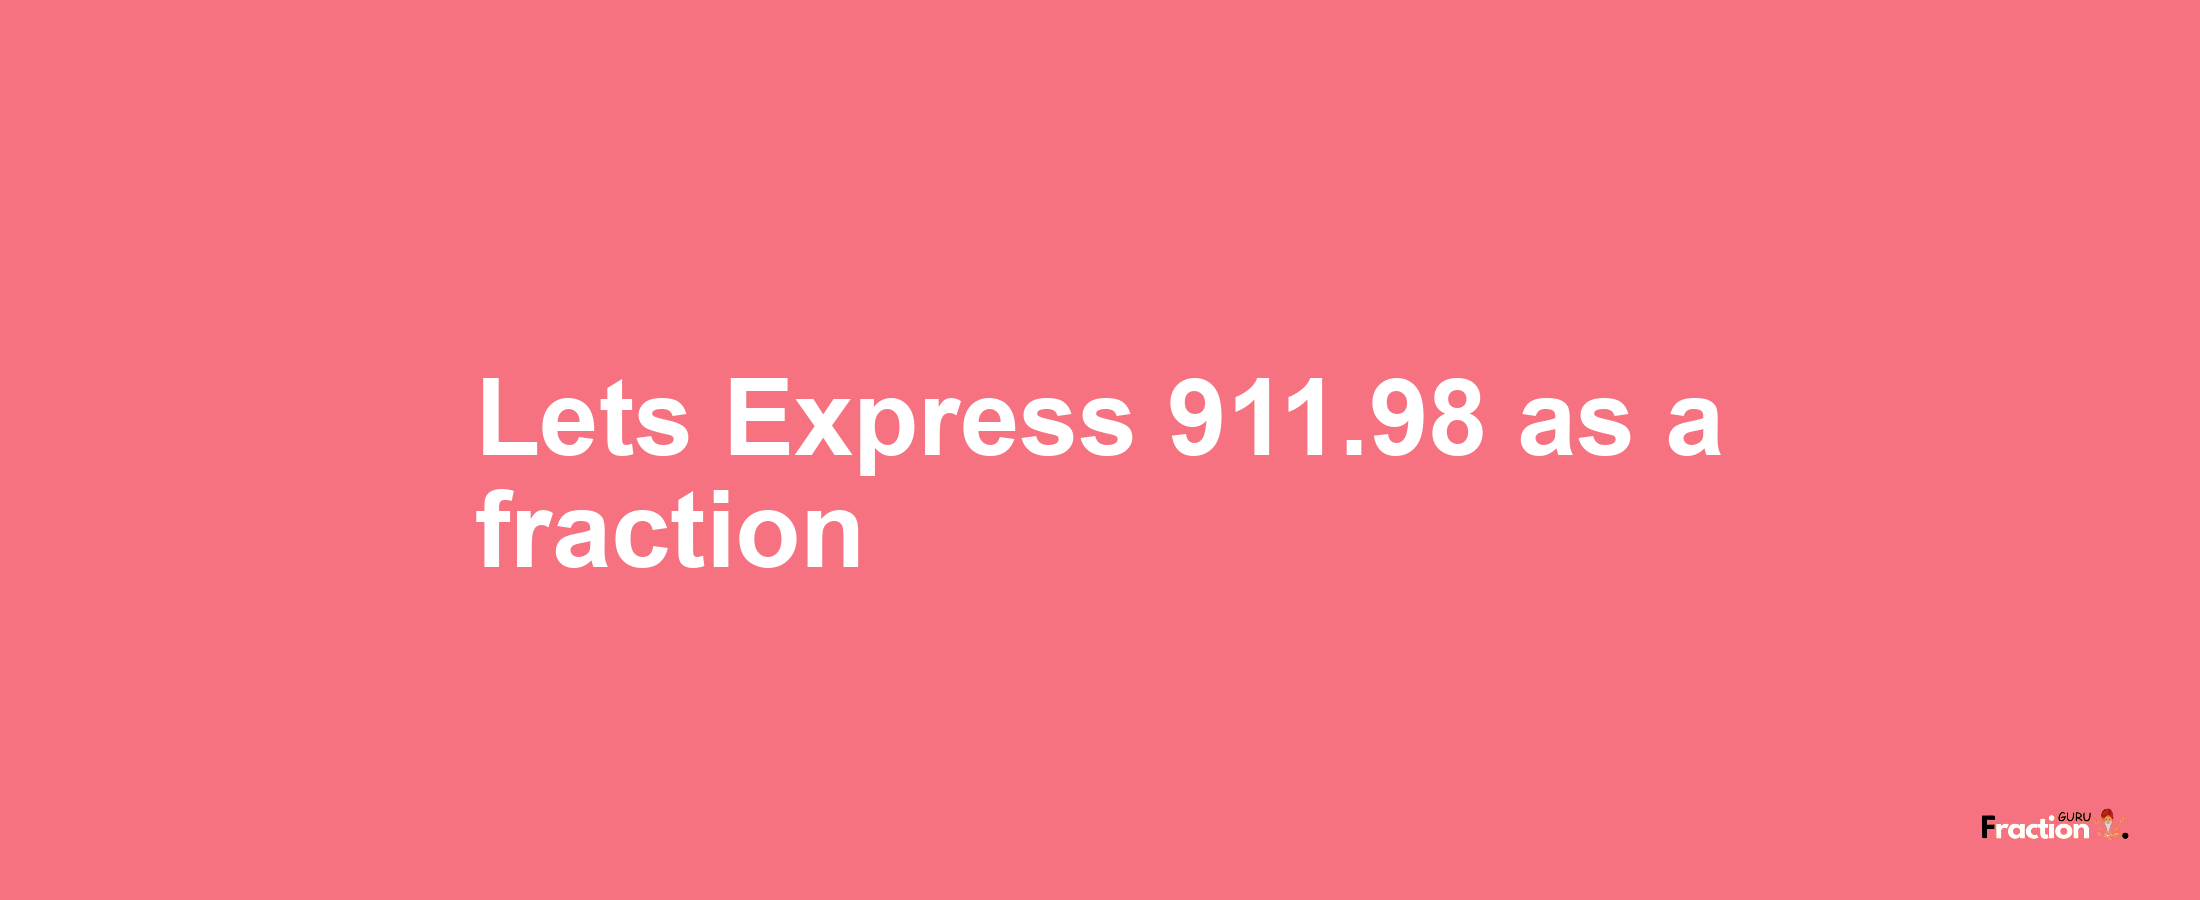 Lets Express 911.98 as afraction